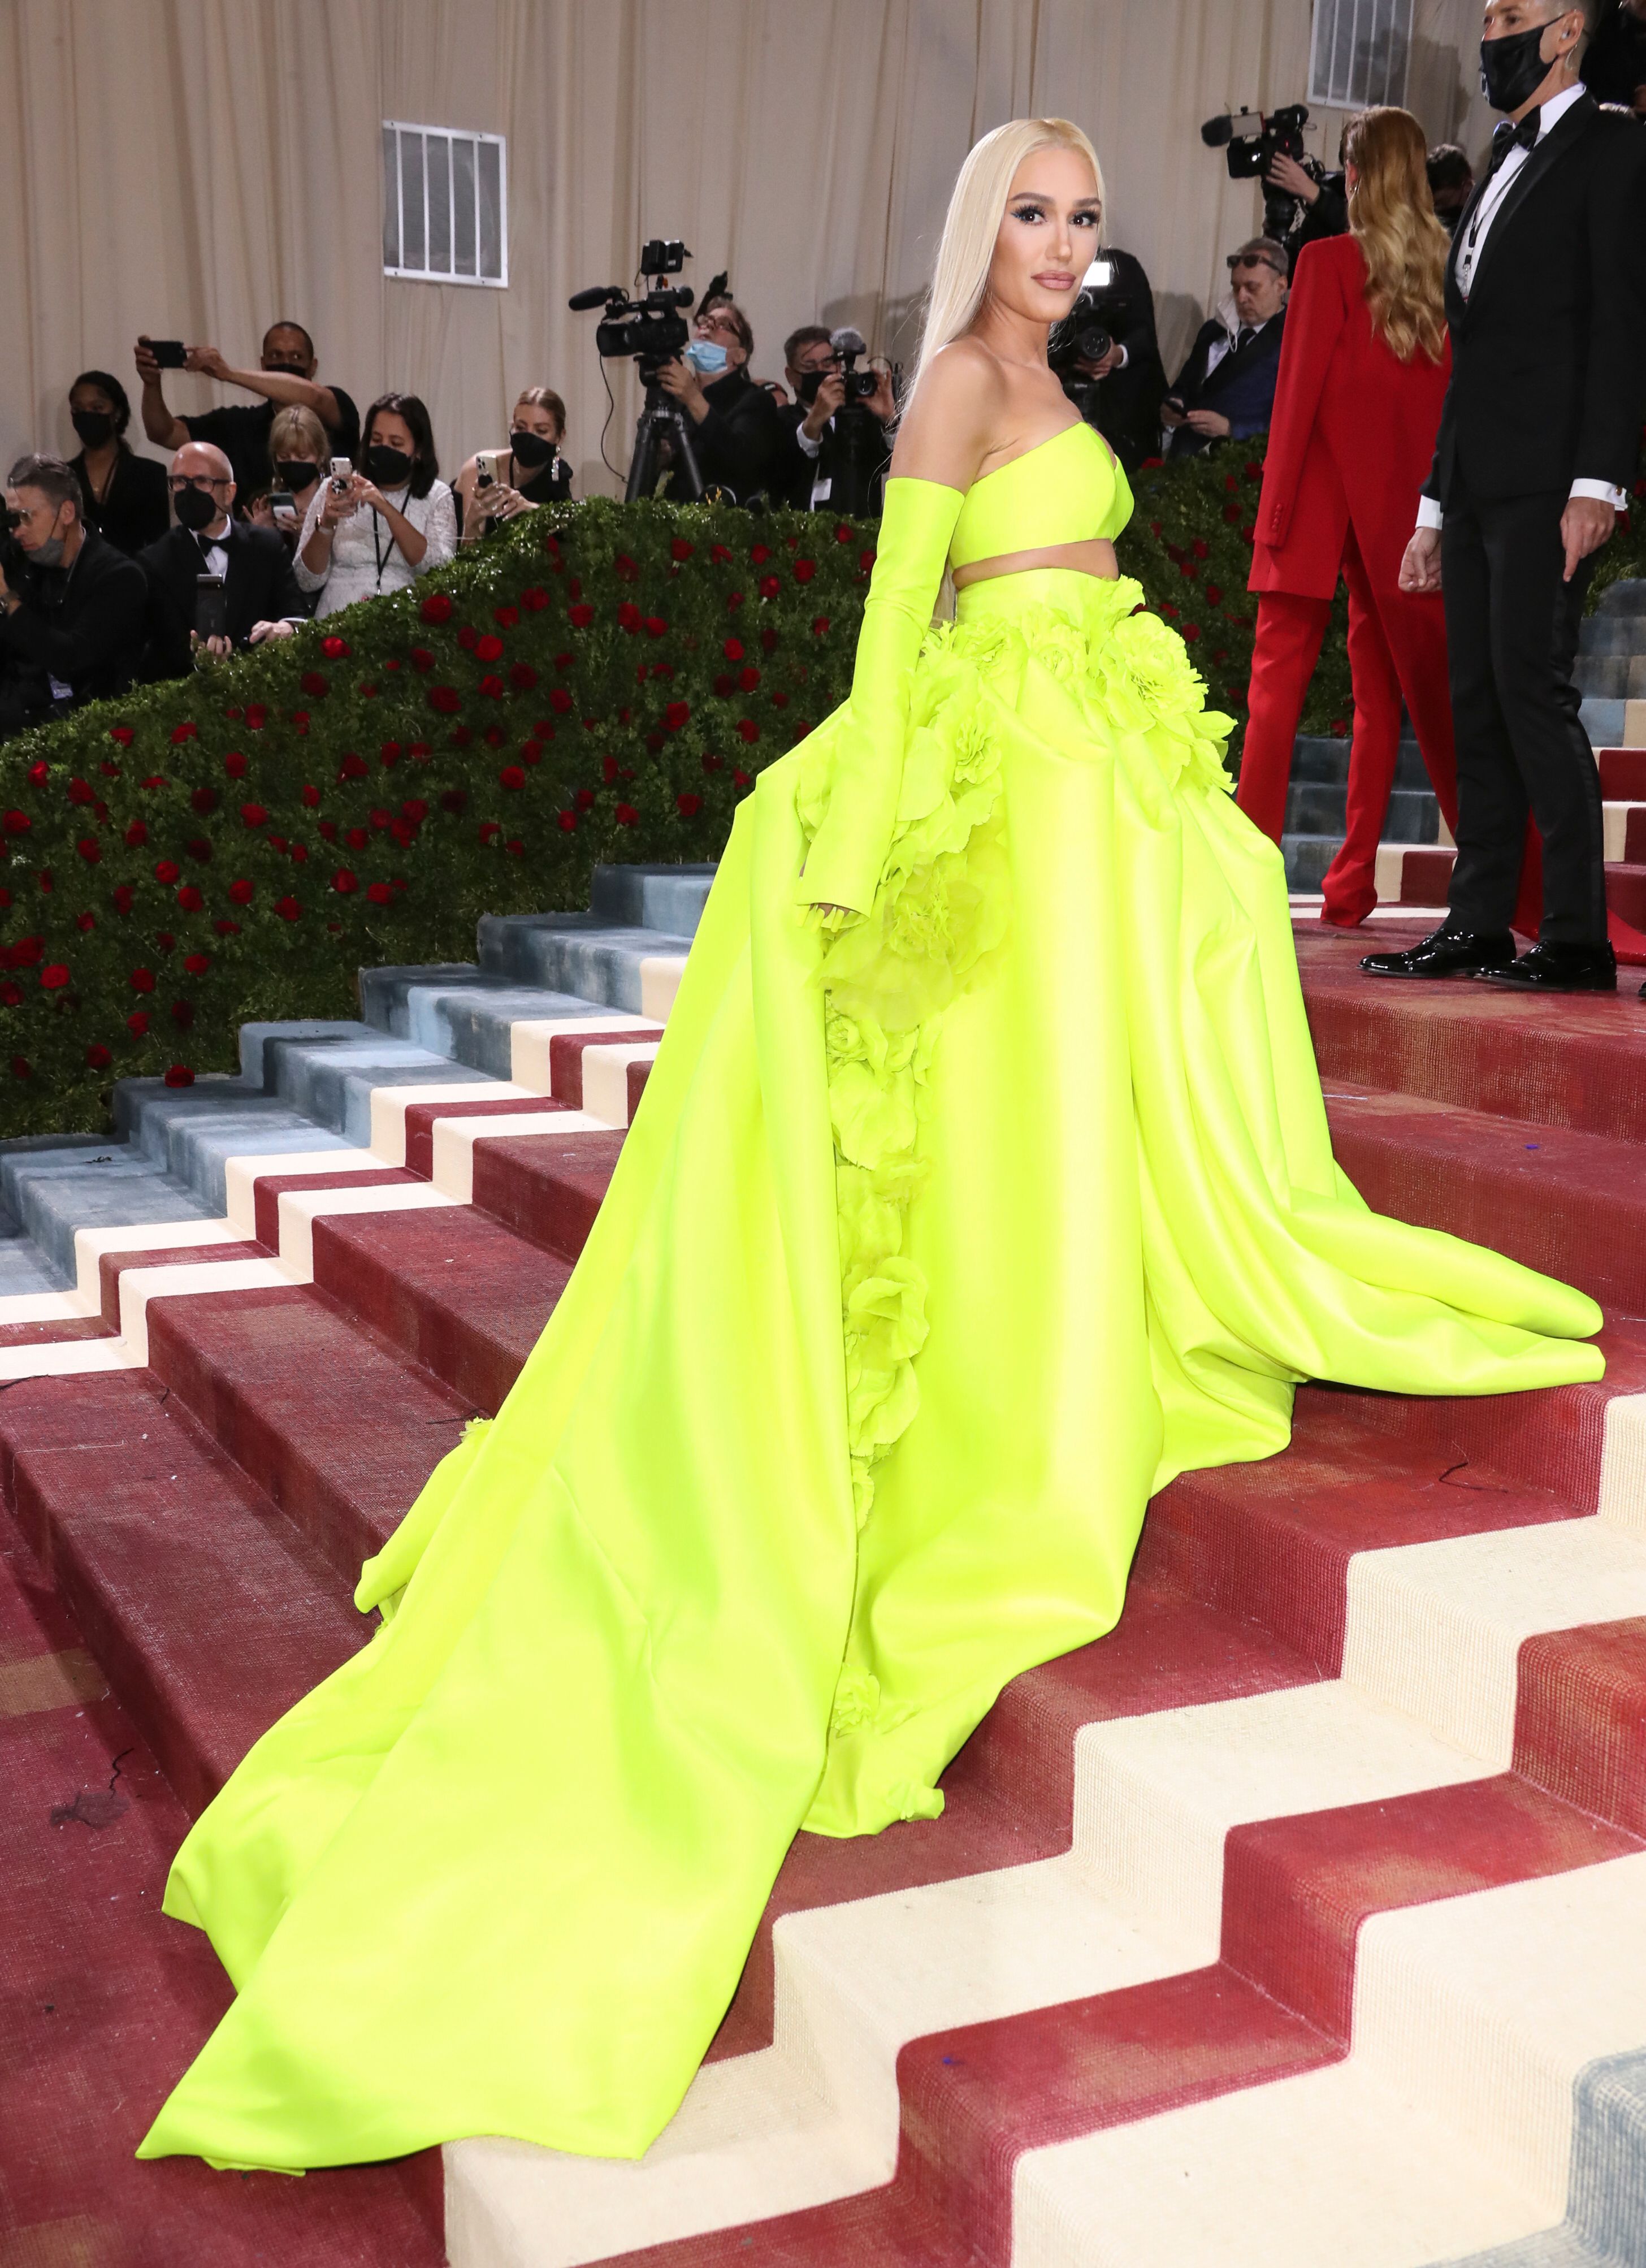 See 37 Broadway and Stage Favorites Who Dazzled at Met Gala 2022